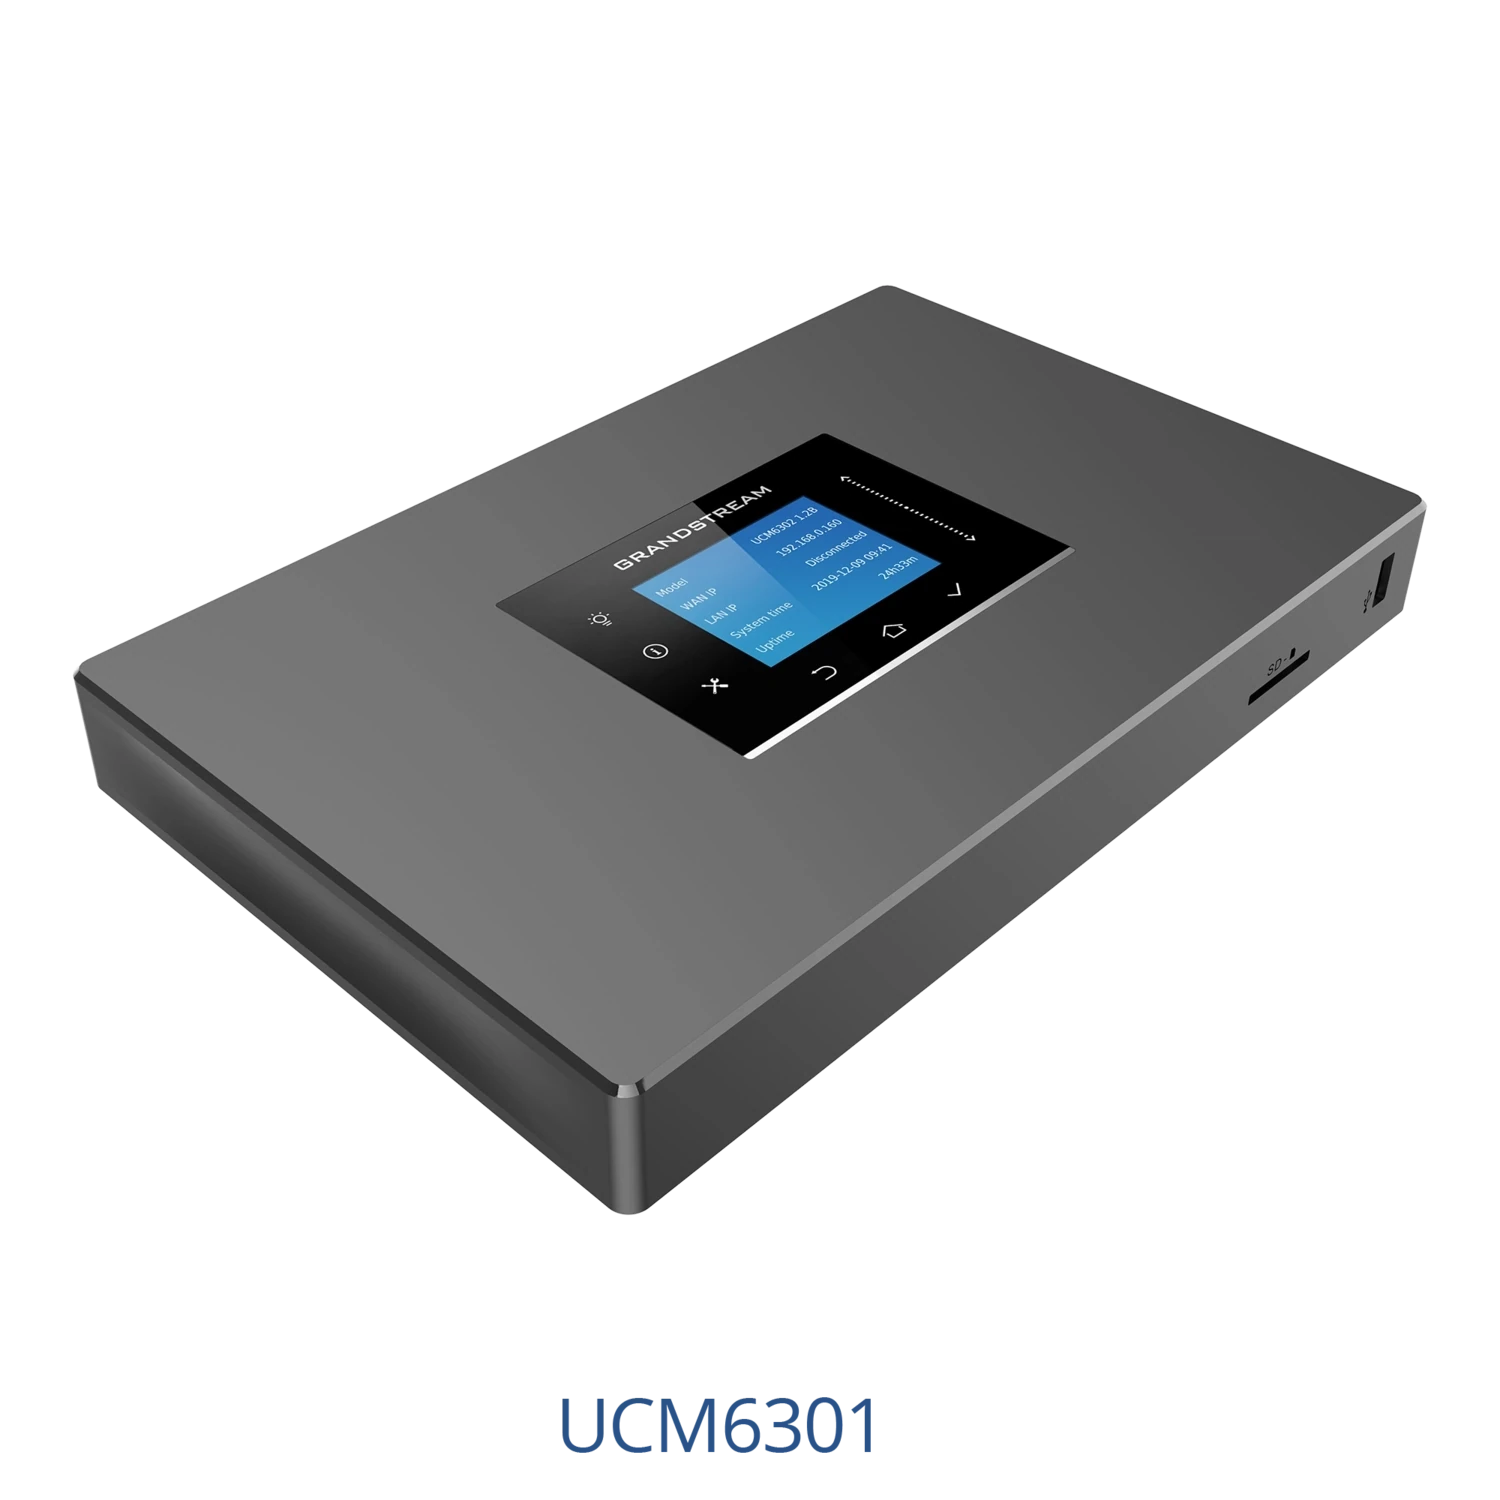 Grand Stream UCM UCM6304A IP Phone System